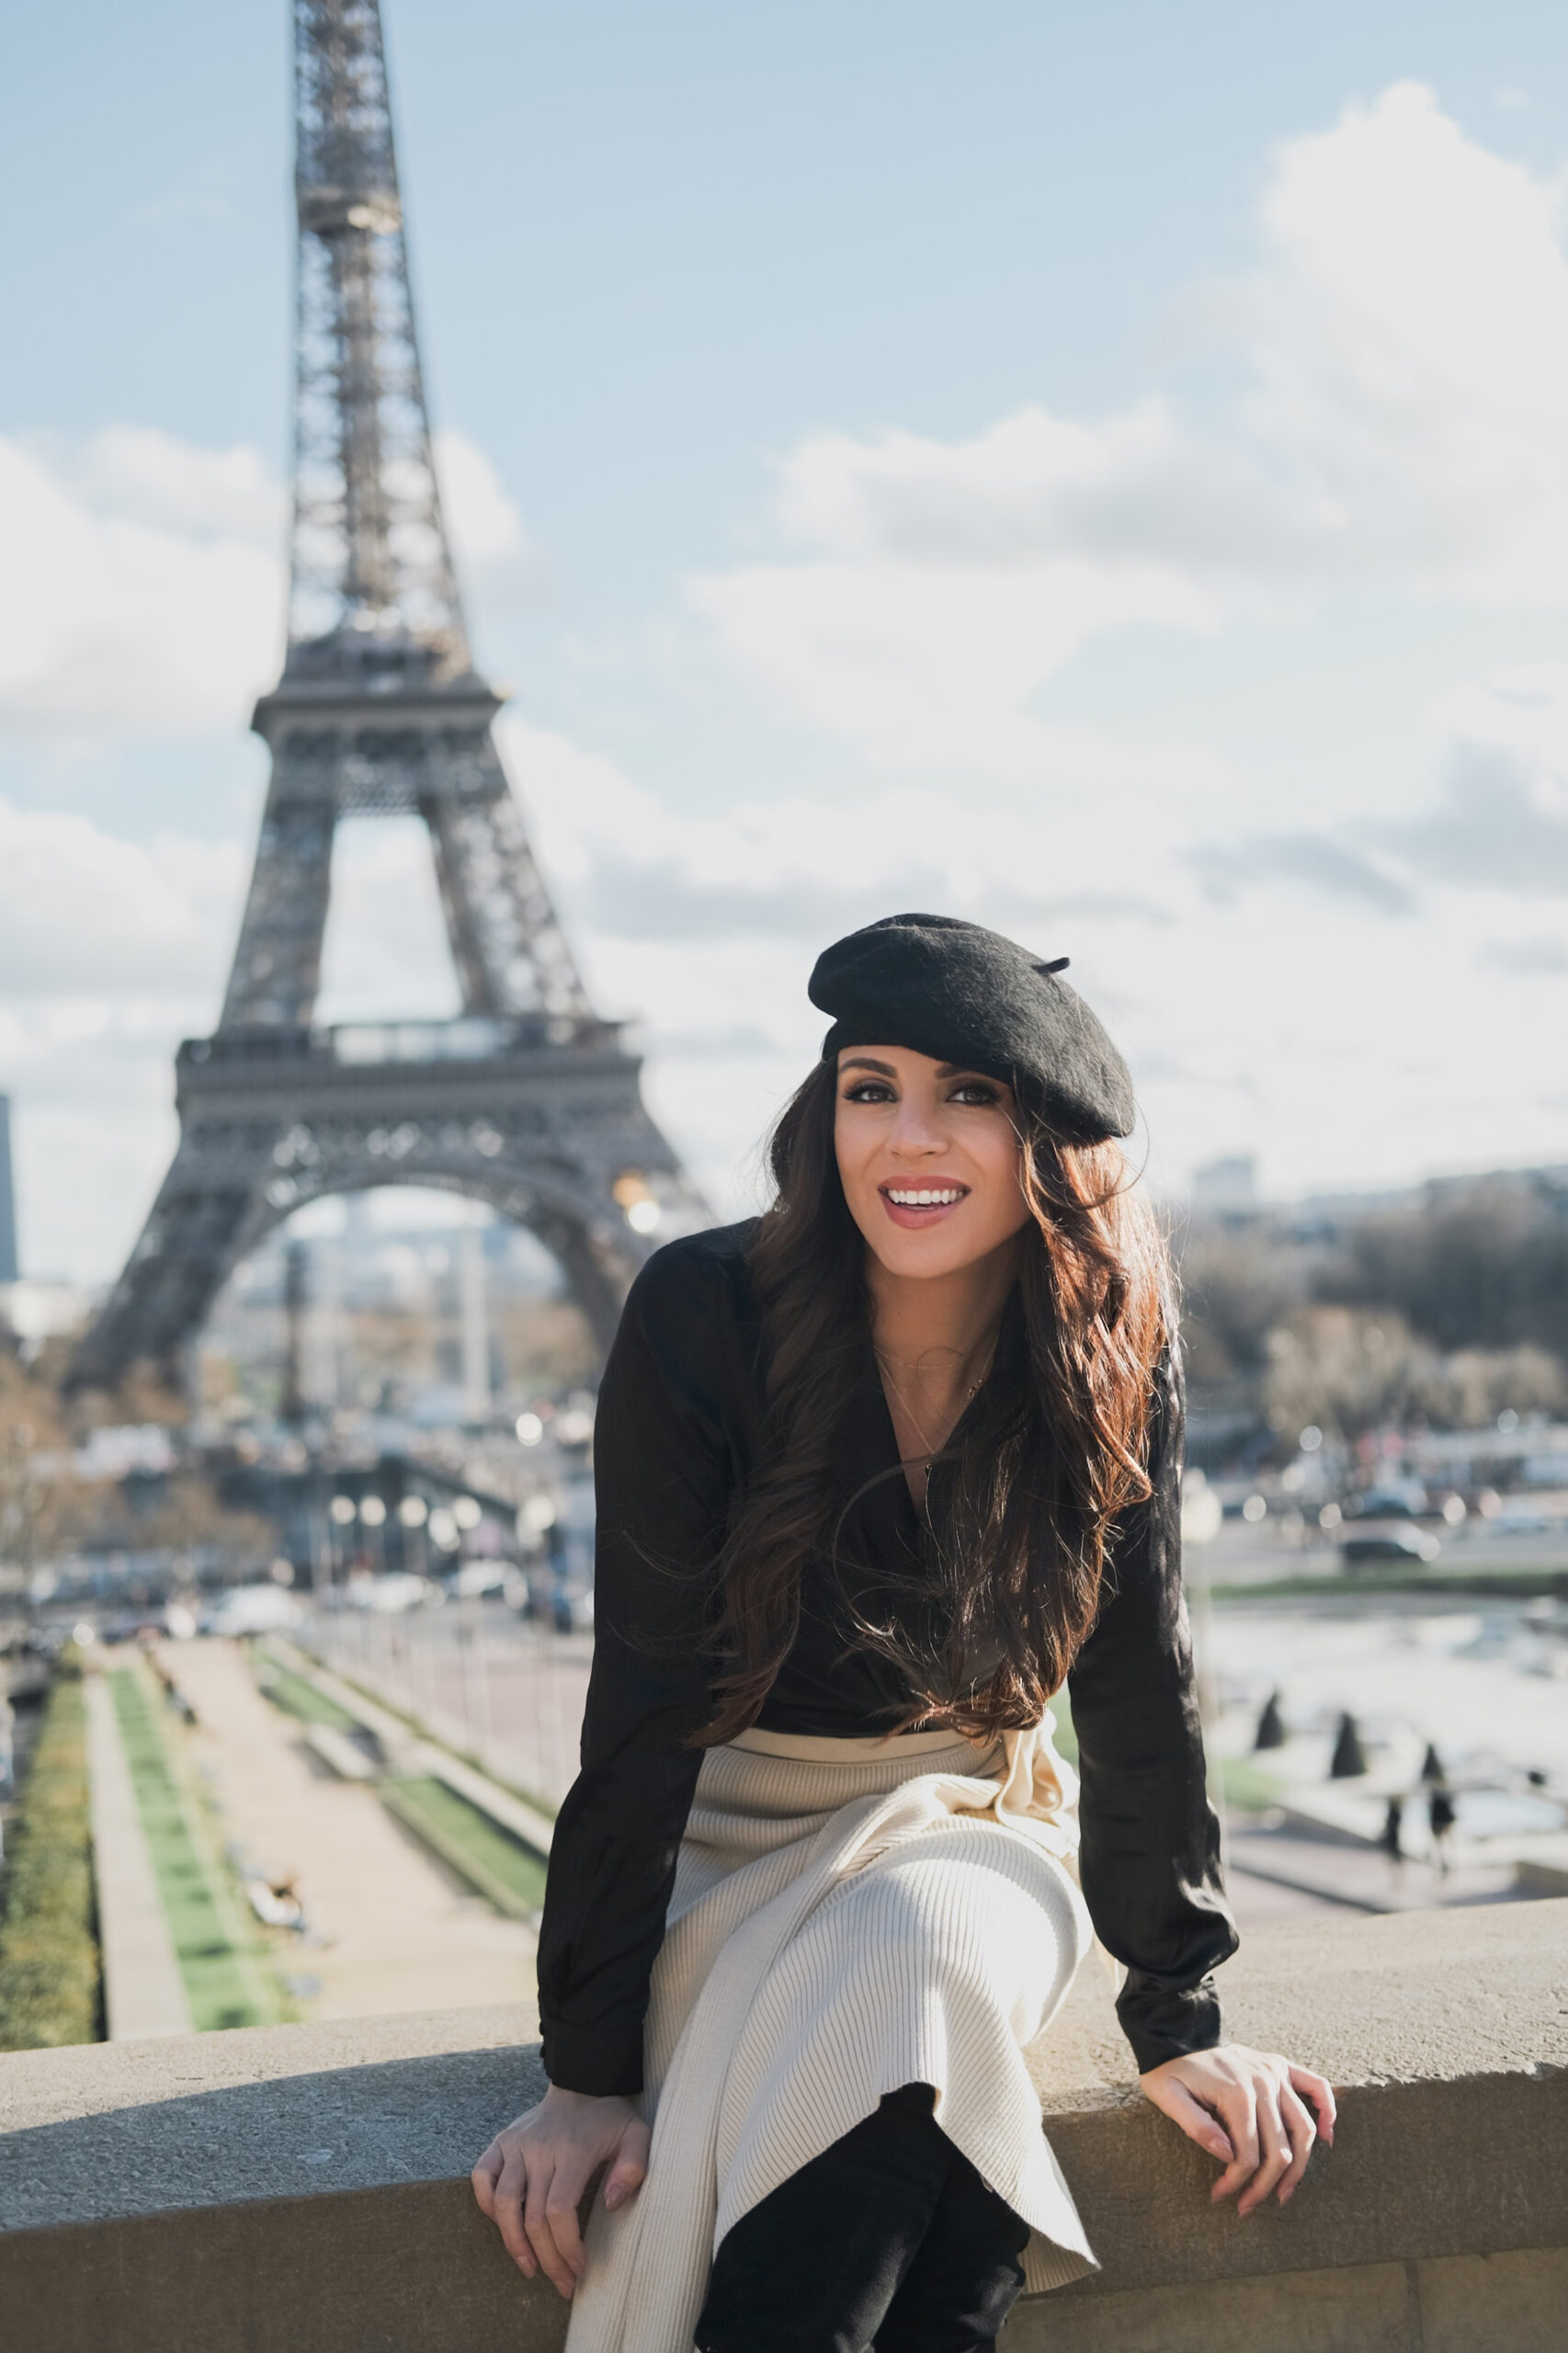 erica matchmaker smiling in Paris France standing at Eiffel tower